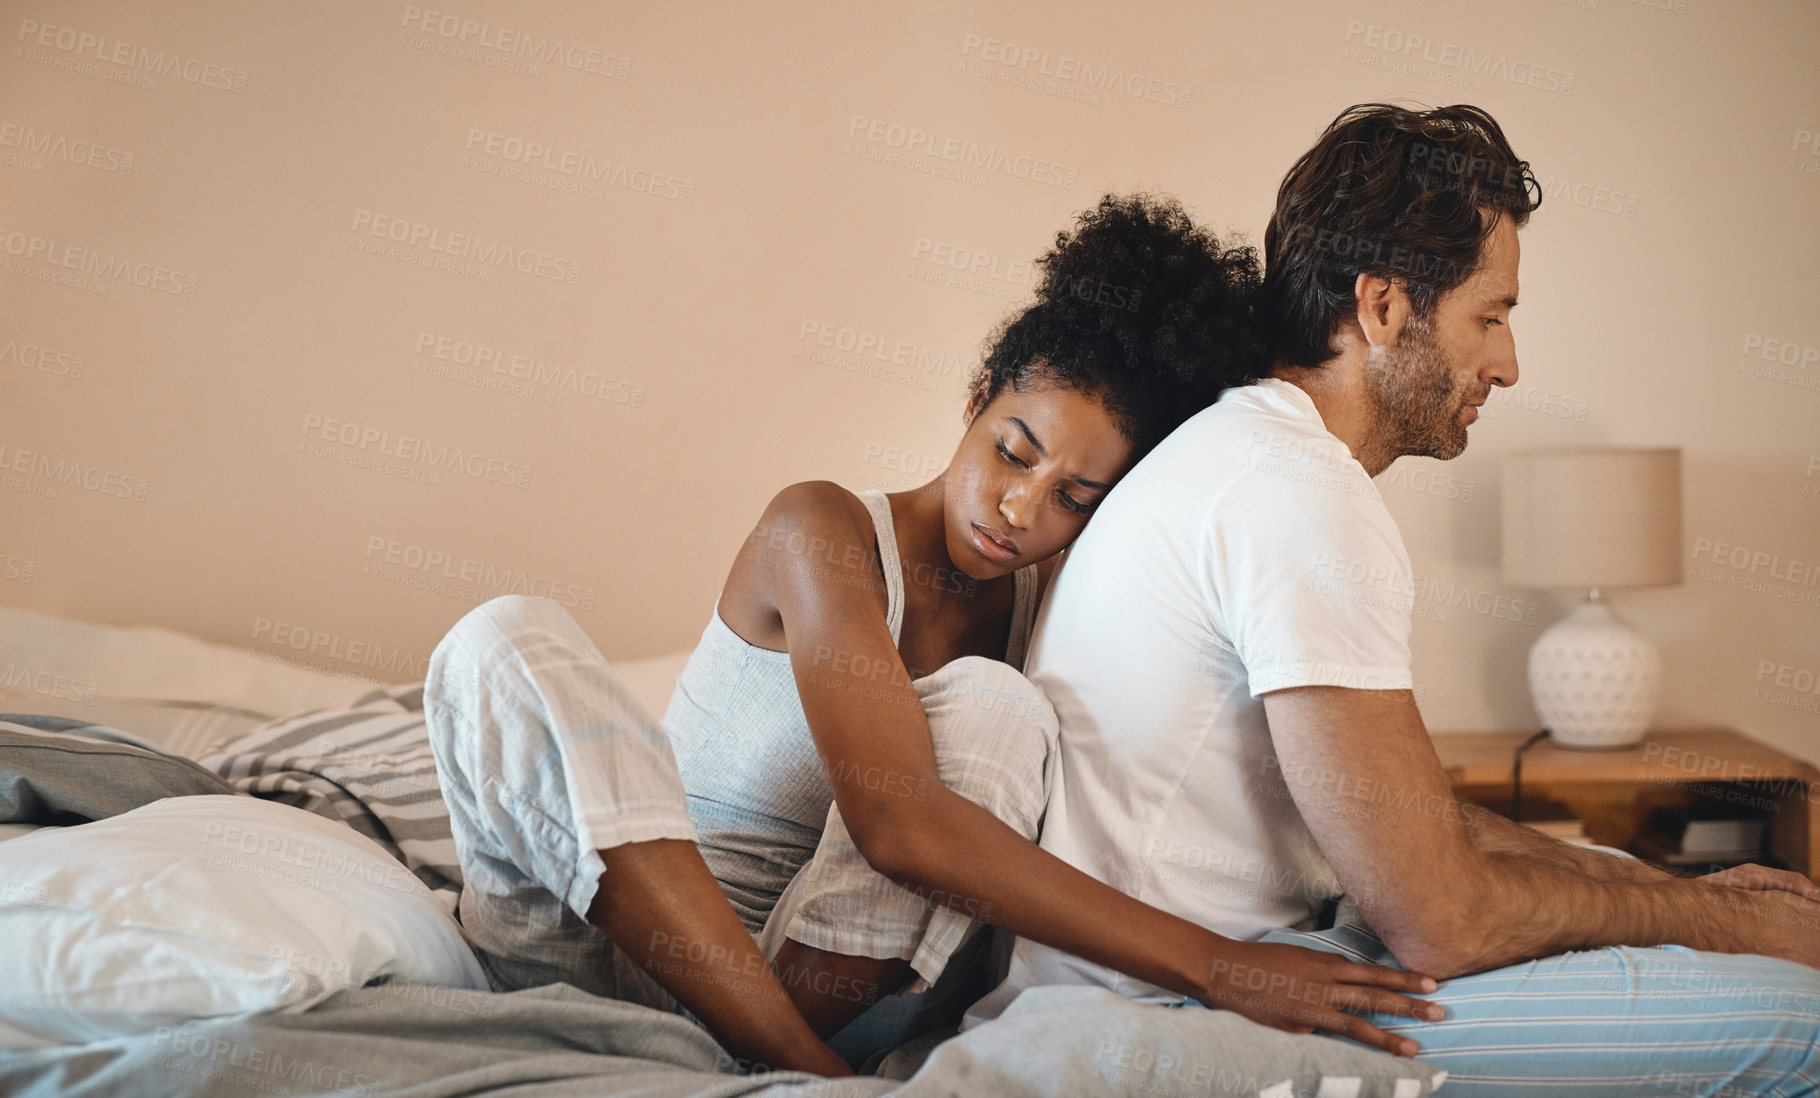 Buy stock photo Sad, frustrated and unhappy man and woman hugging after a breakup in their bedroom. Upset, annoyed and depressed male getting support with his wife. Interracial couple cuddling to comfort husband.